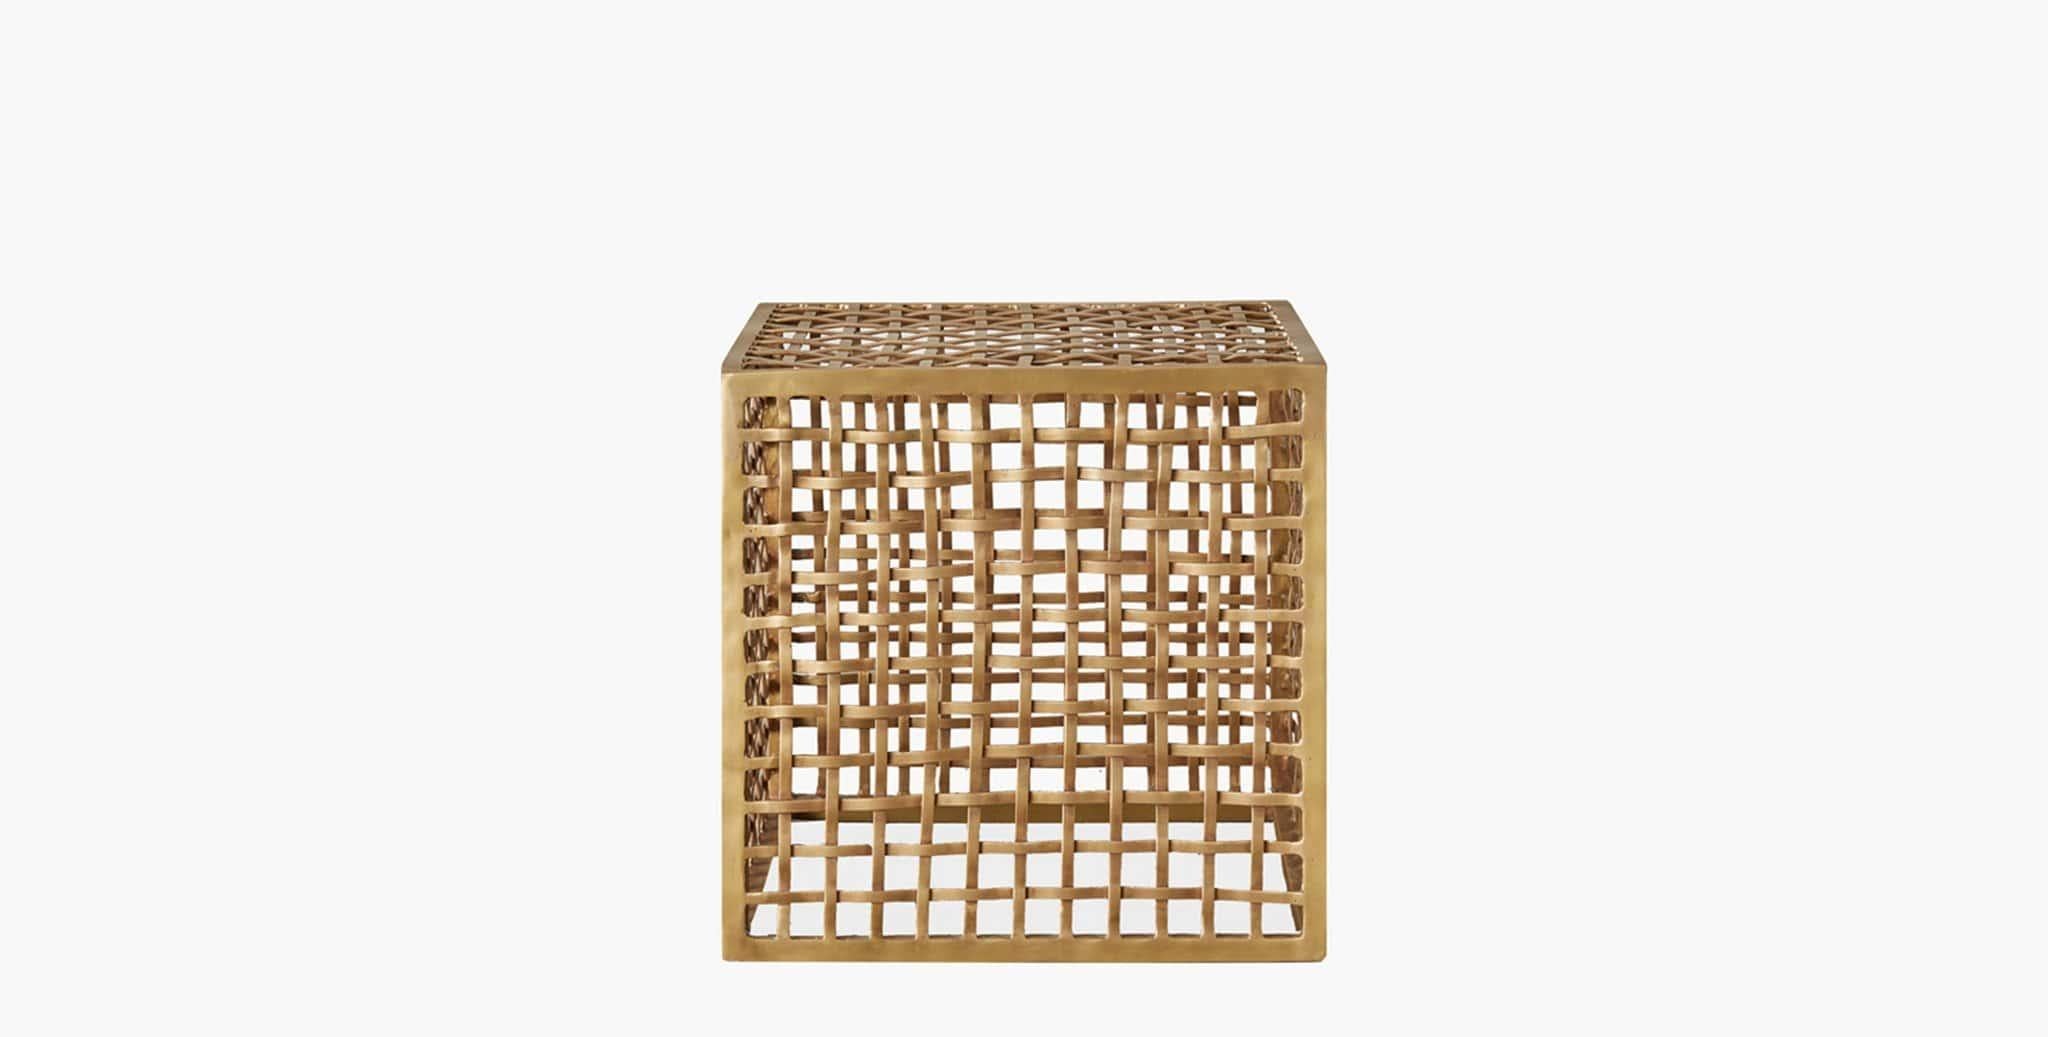 Our Lennox Side Table features a cube Silhouette crafted with a delicate brass weave, making it the perfect accent table. Our handcrafted fabrics, leathers, and finishes are inspired by the natural variations within fibers, textures, and weaves.